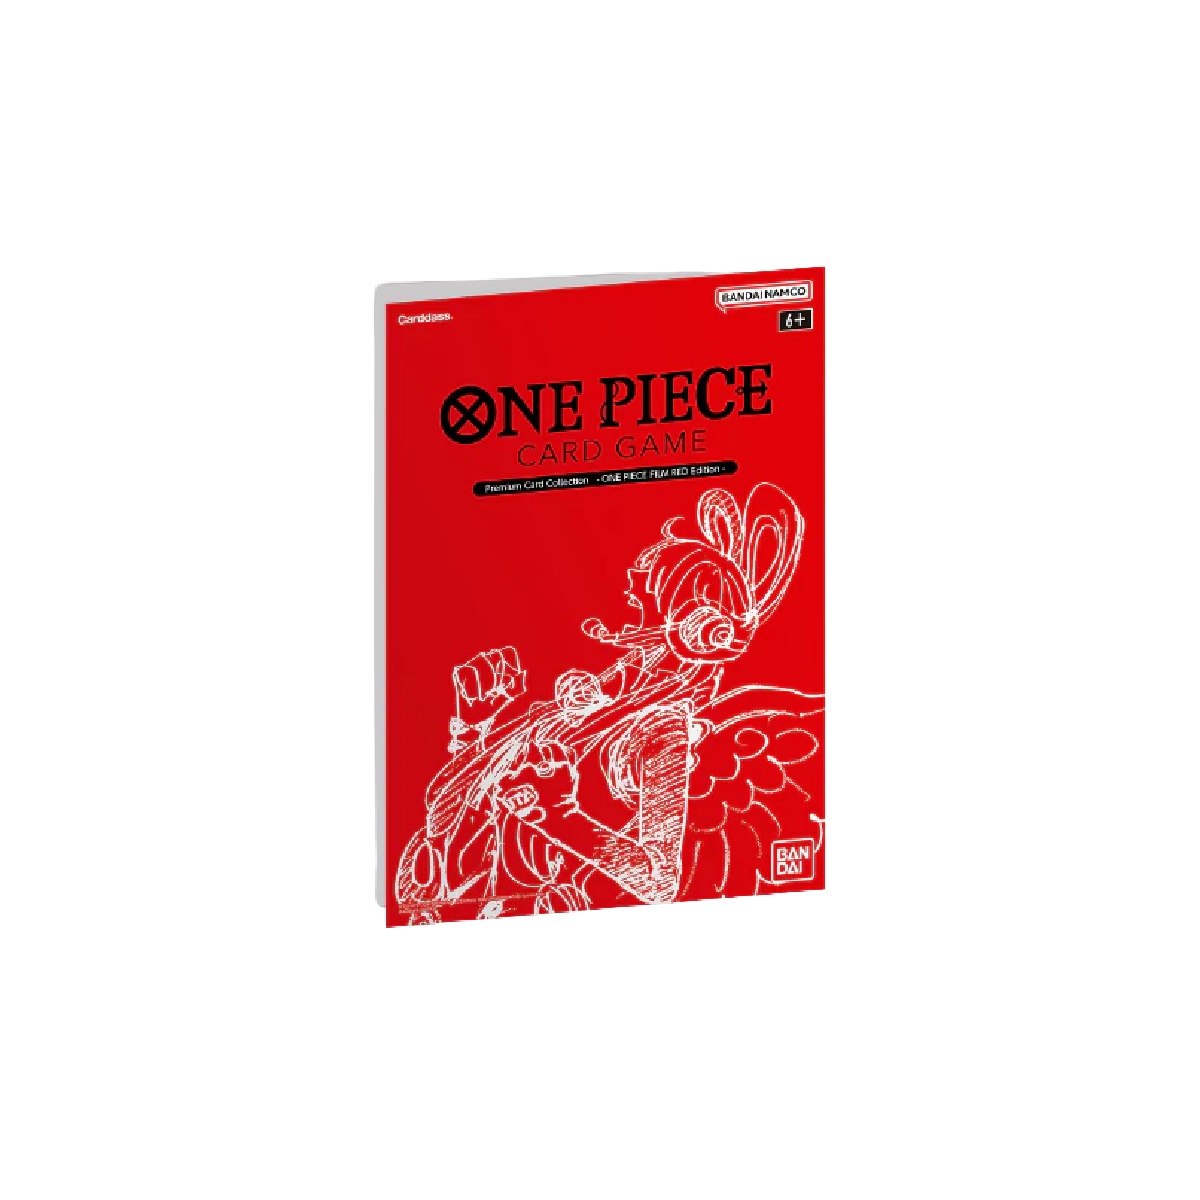 One Piece Premium Card Collection RED FILM EDITION 1